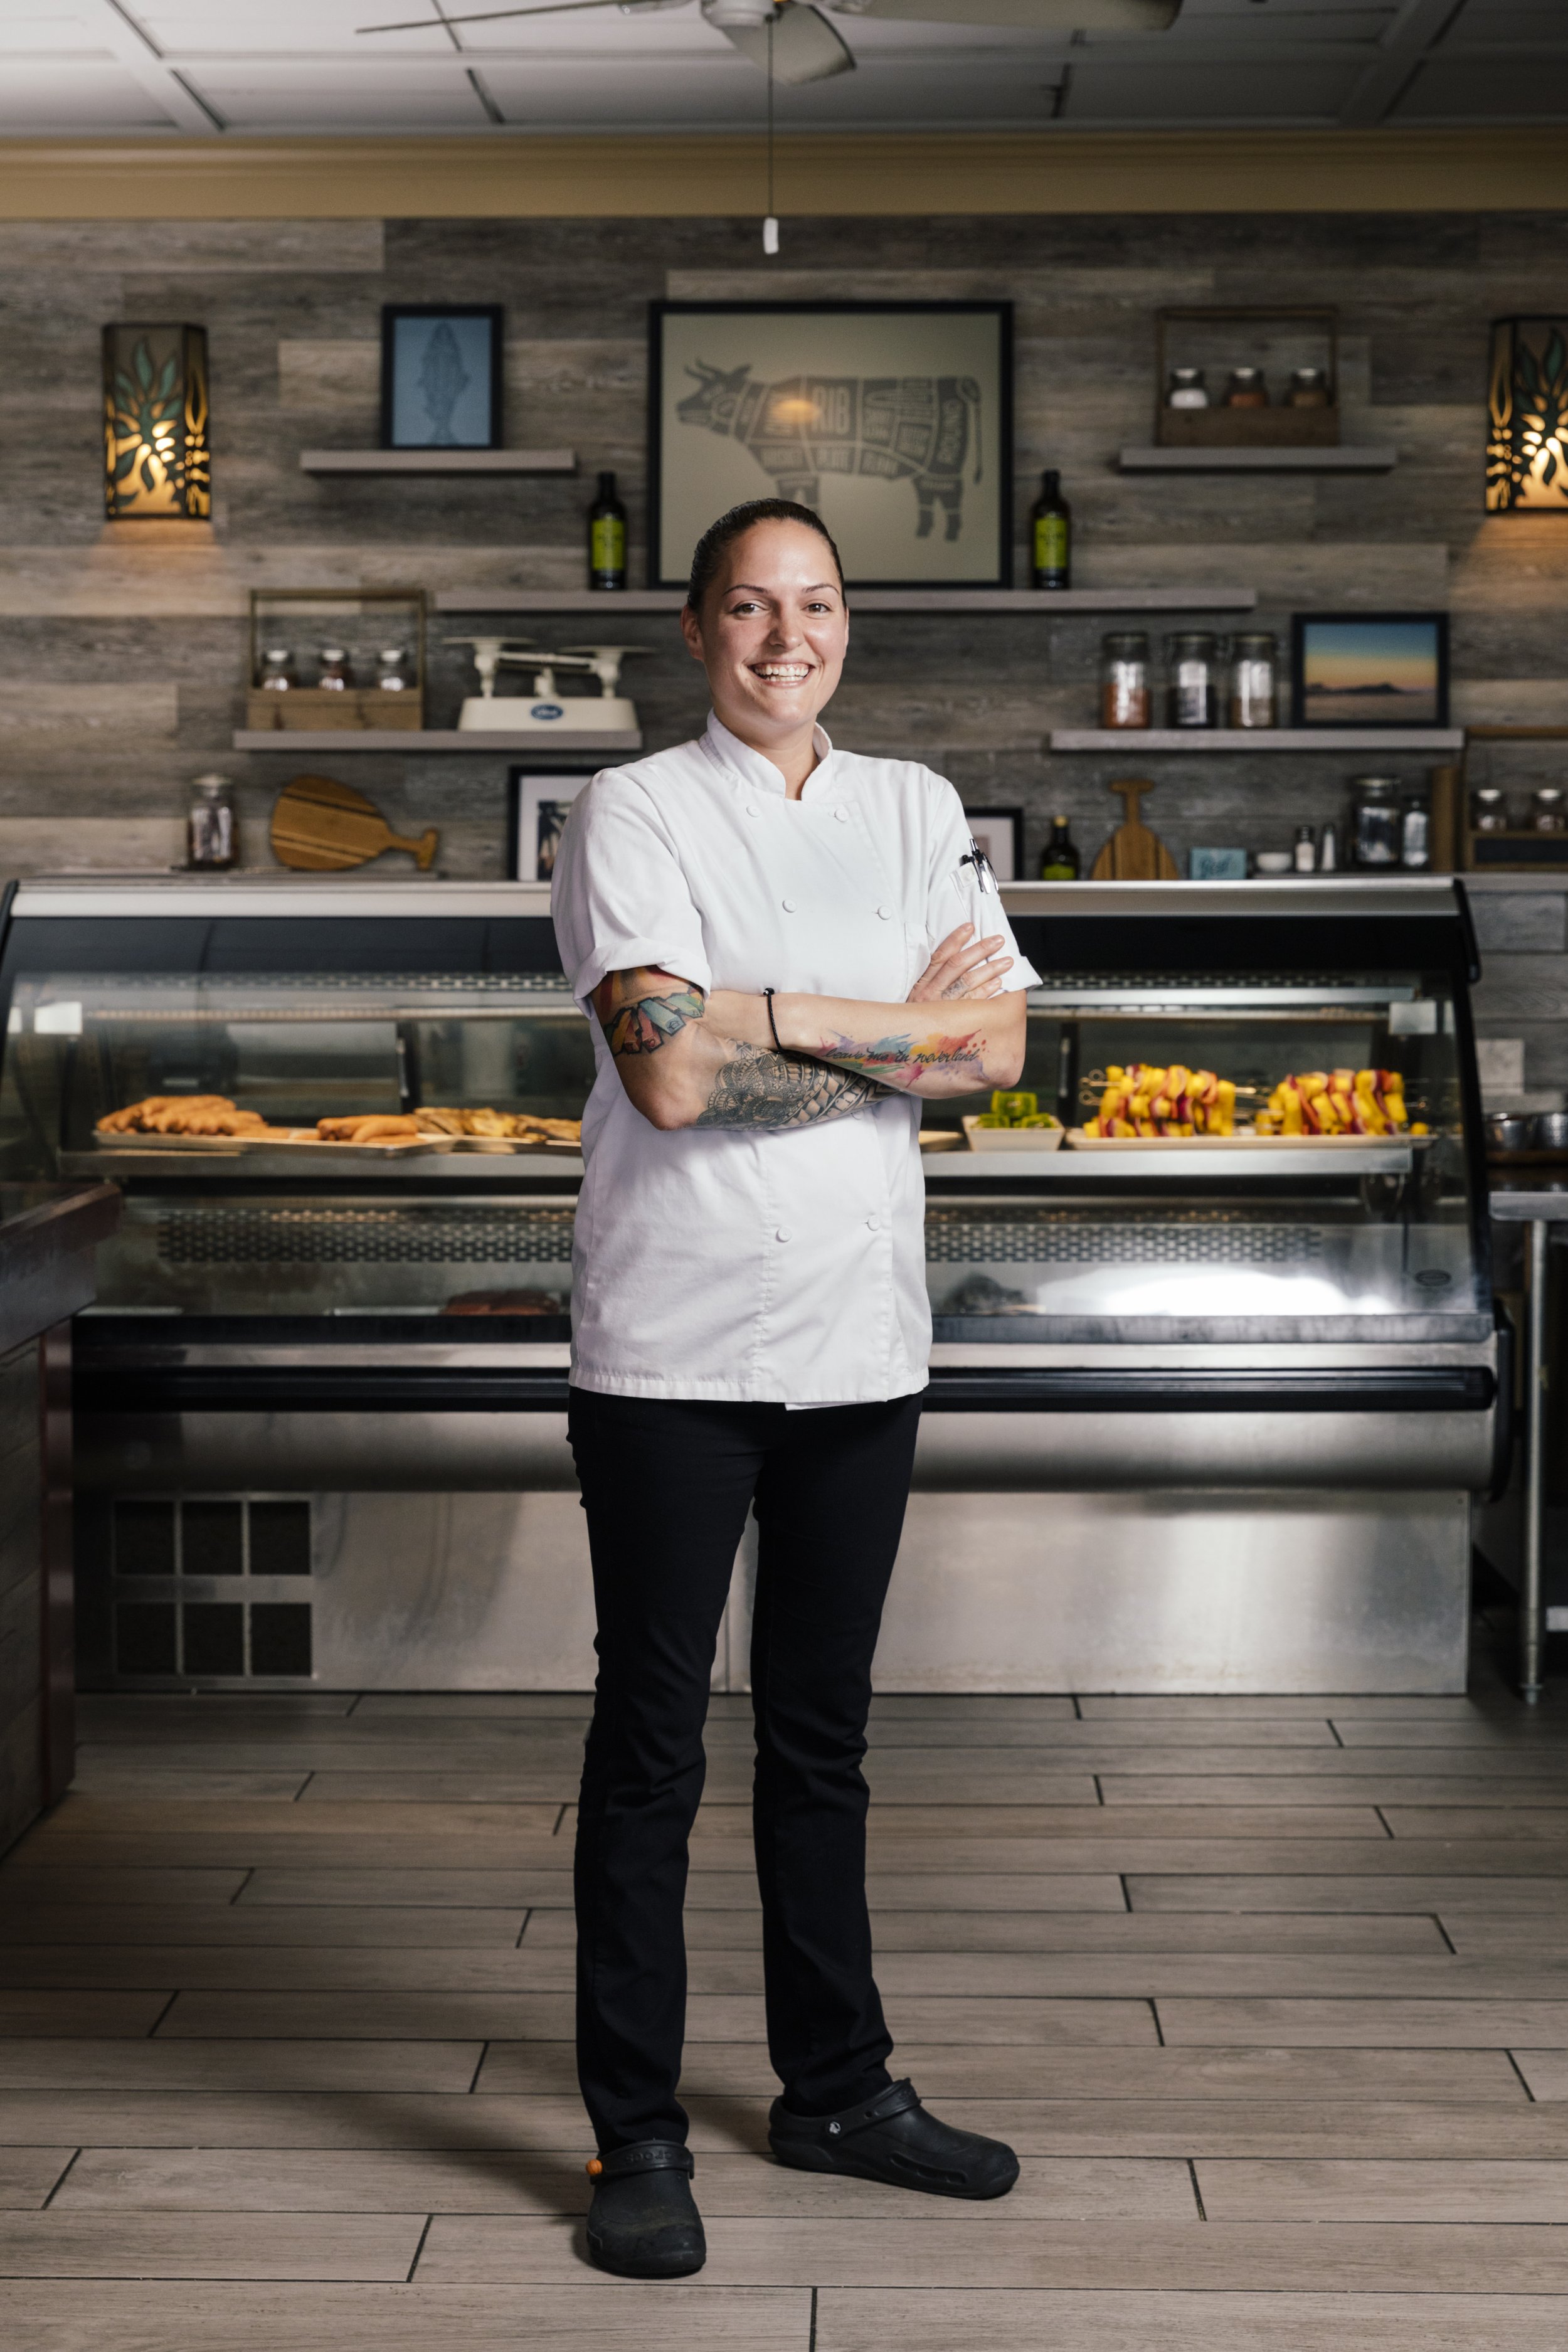  In 2017 Delia Romano started at Outrigger Reef Waikiki Beach Resort as sous chef and by the end of the year, she was named food and beverage director of that property along with Outrigger Waikiki Beach Resort, while also still overseeing the kitchen